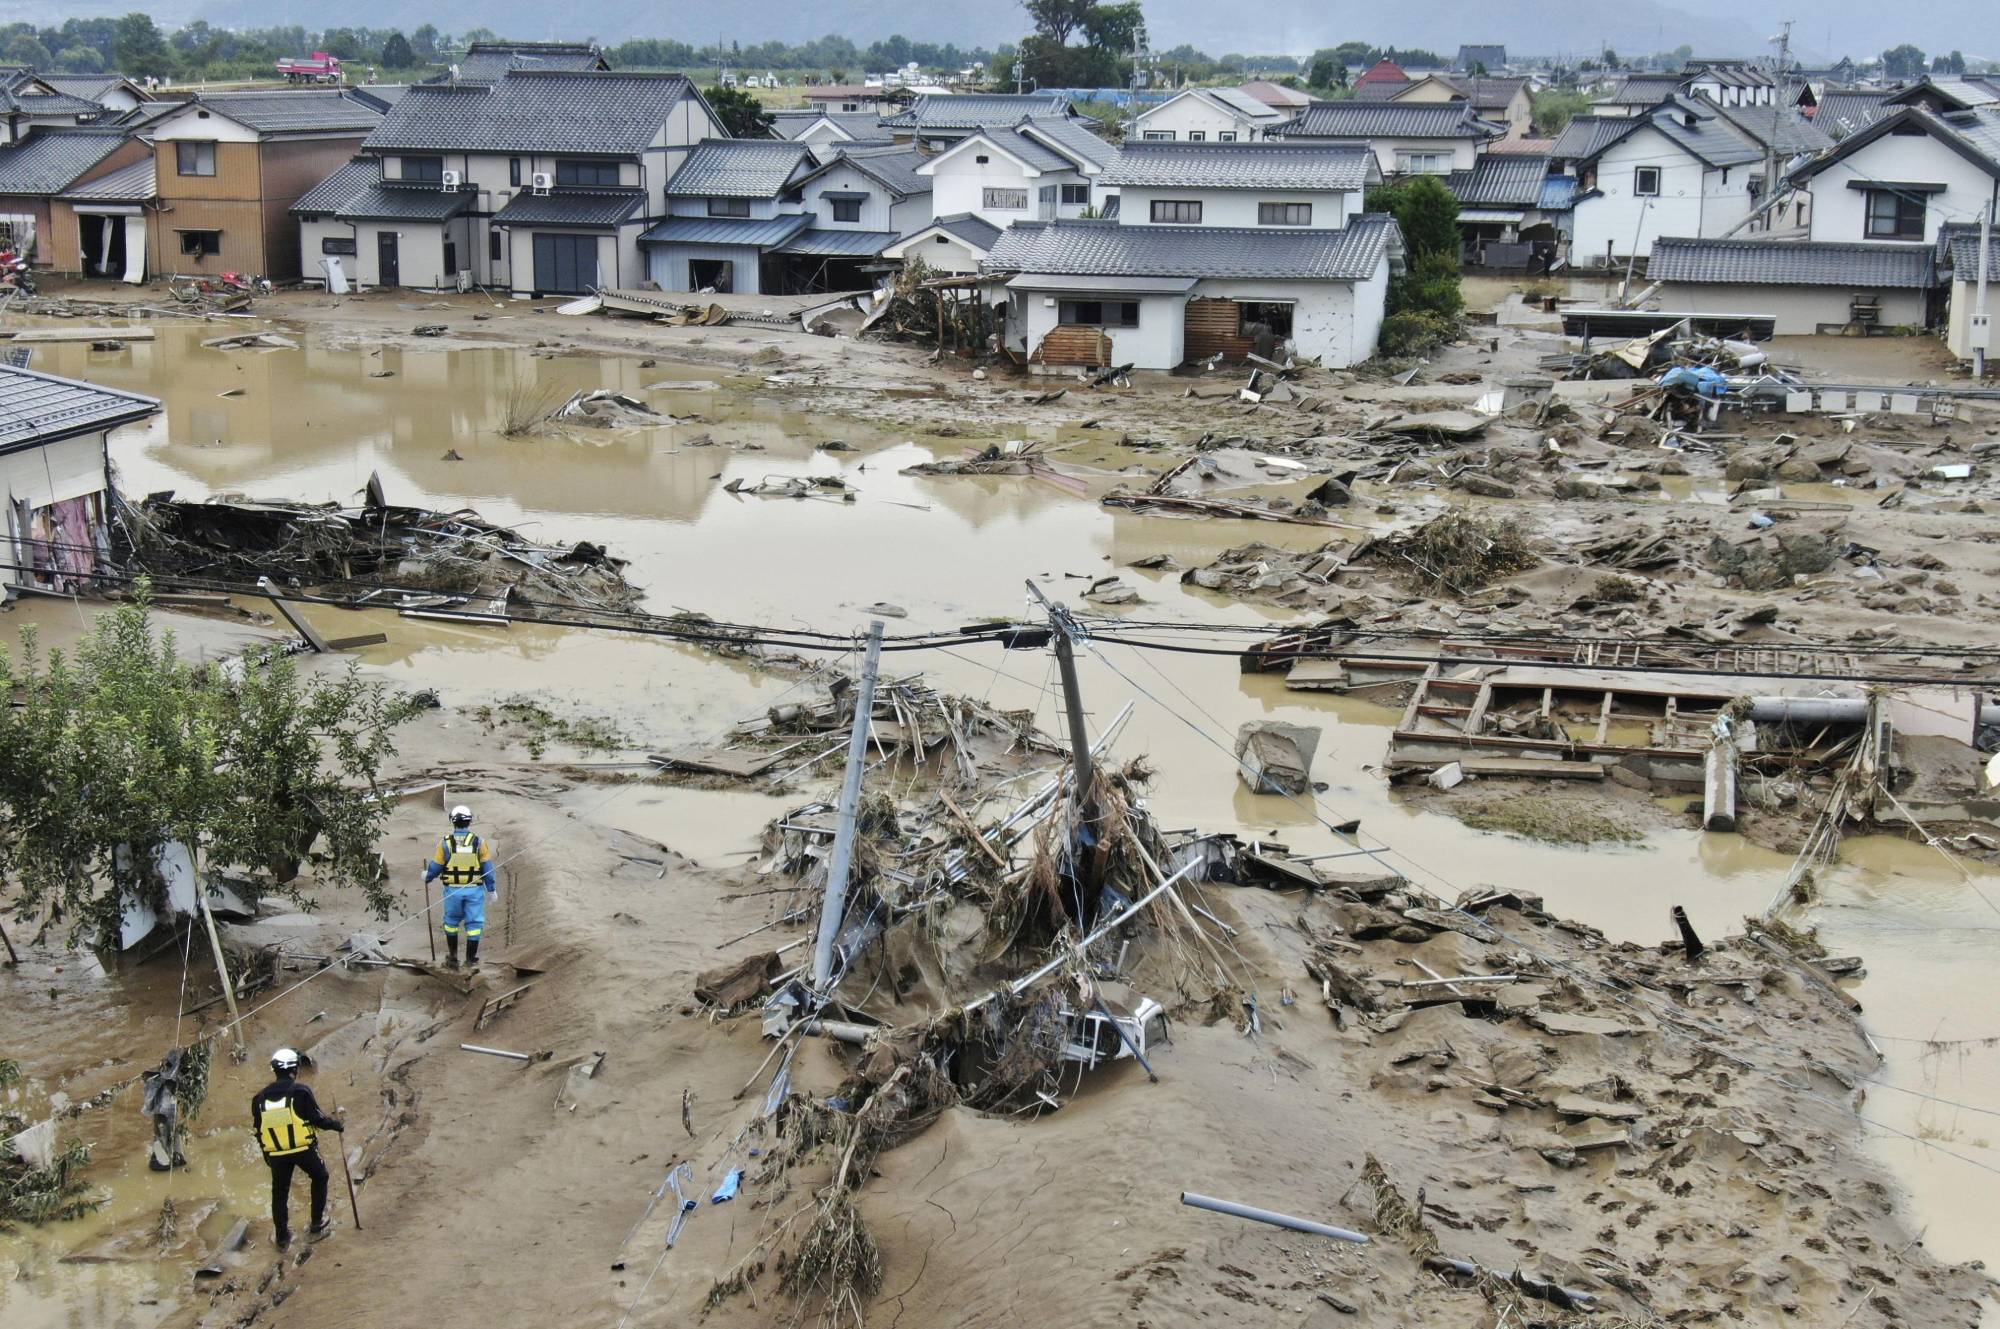 Some parts of Nagano Prefecture were heavily damaged by Typhoon Hagibis in October 2019. | KYODO